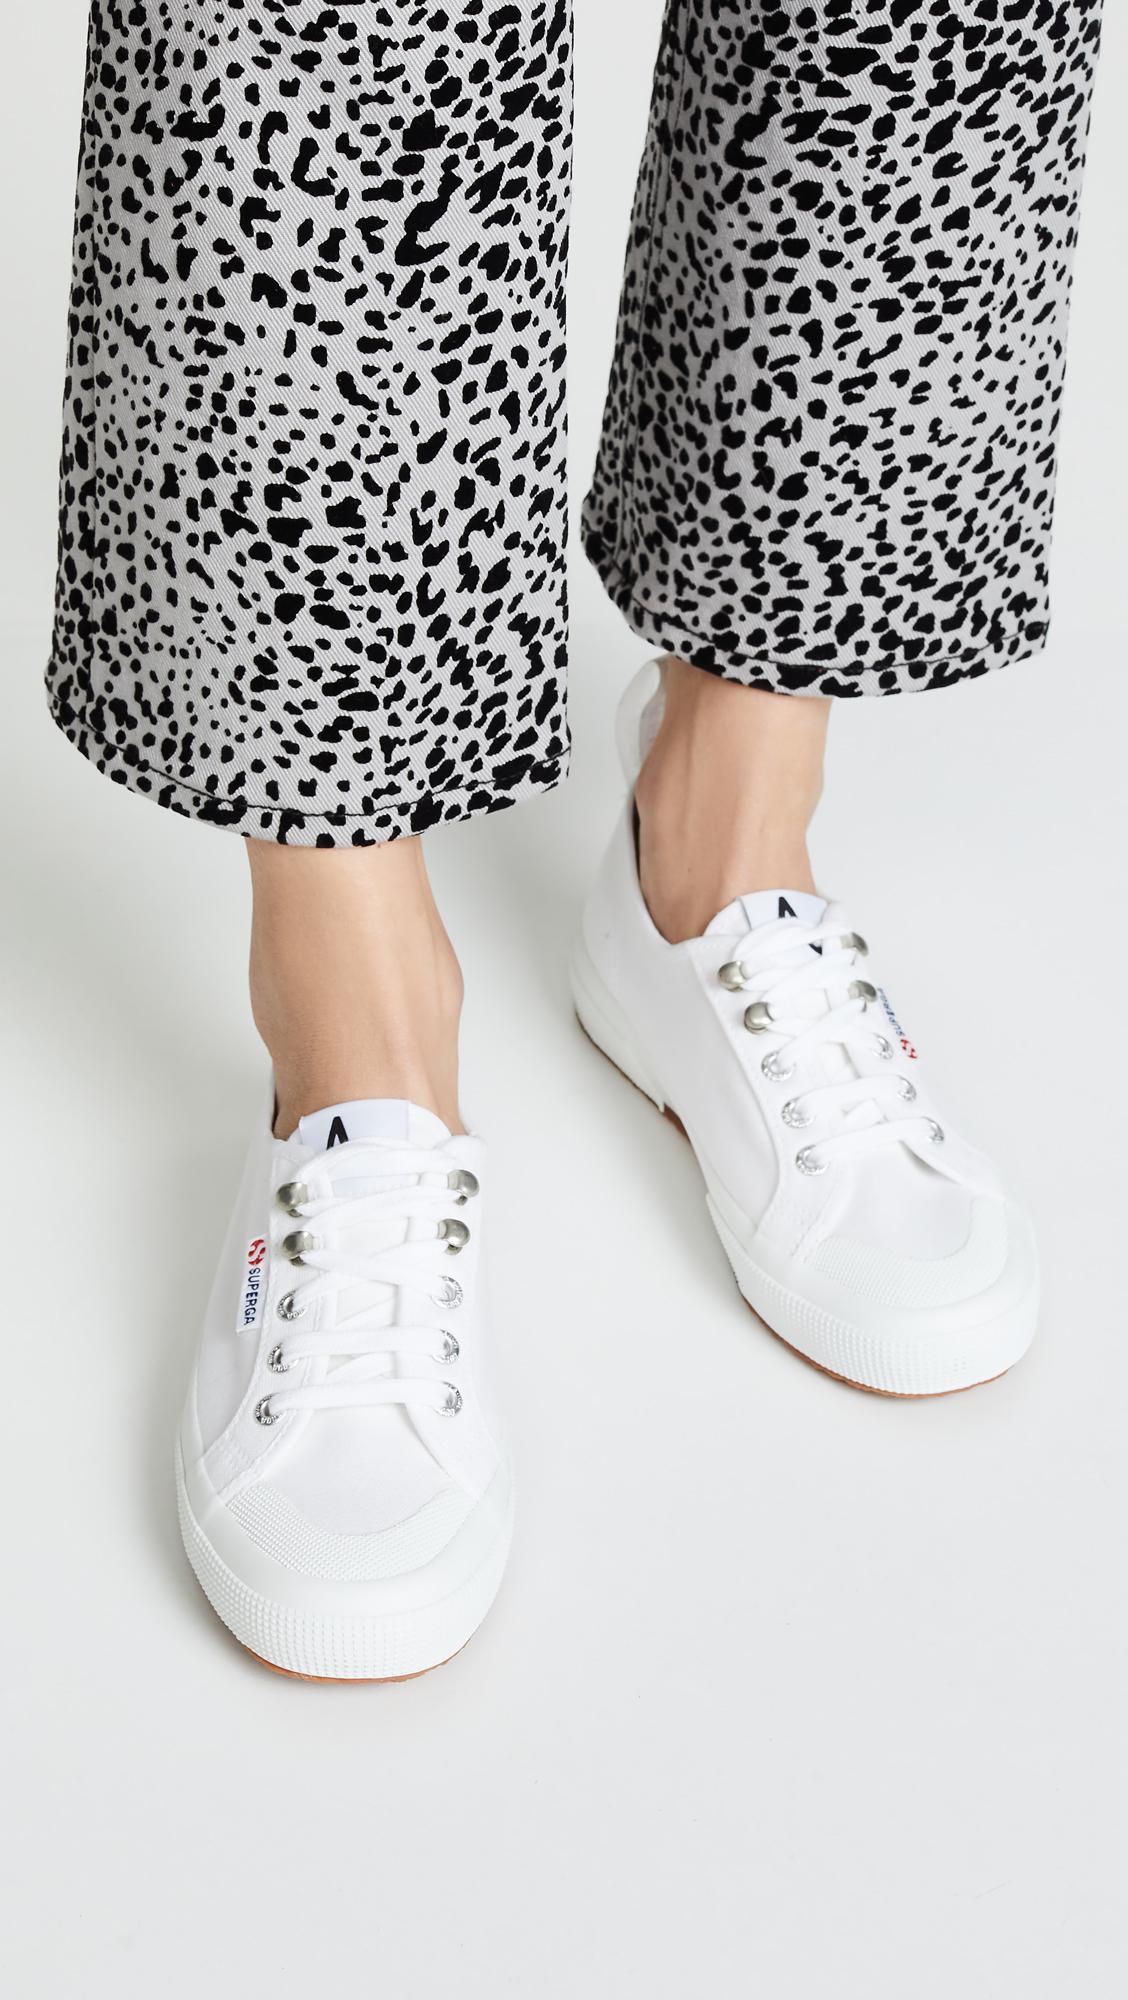 Superga X Alexa Chung 2294 Cothook Lace Up Sneakers in White | Lyst